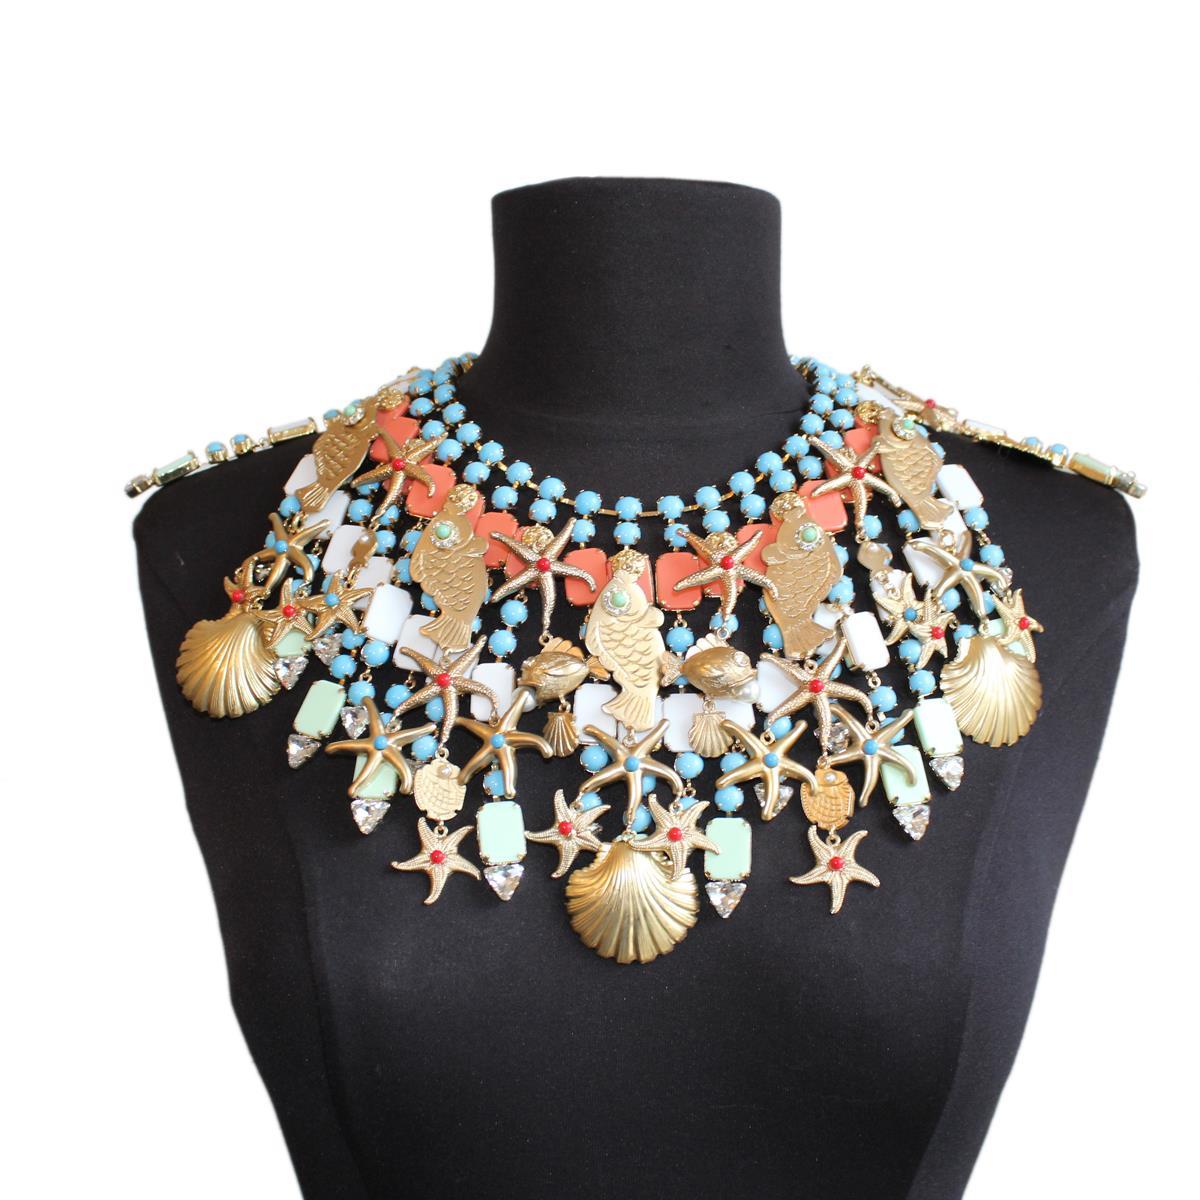 Stunning fancy piece by Carlo Zini Milano
One of the greatest world fashion jewelry designers
New summer 2019 colection !
Non allergenic rhodium
Opaque Gold dipped
Sea theme
Amazing creation of swarovski crystals, rhinestones and resins
100%